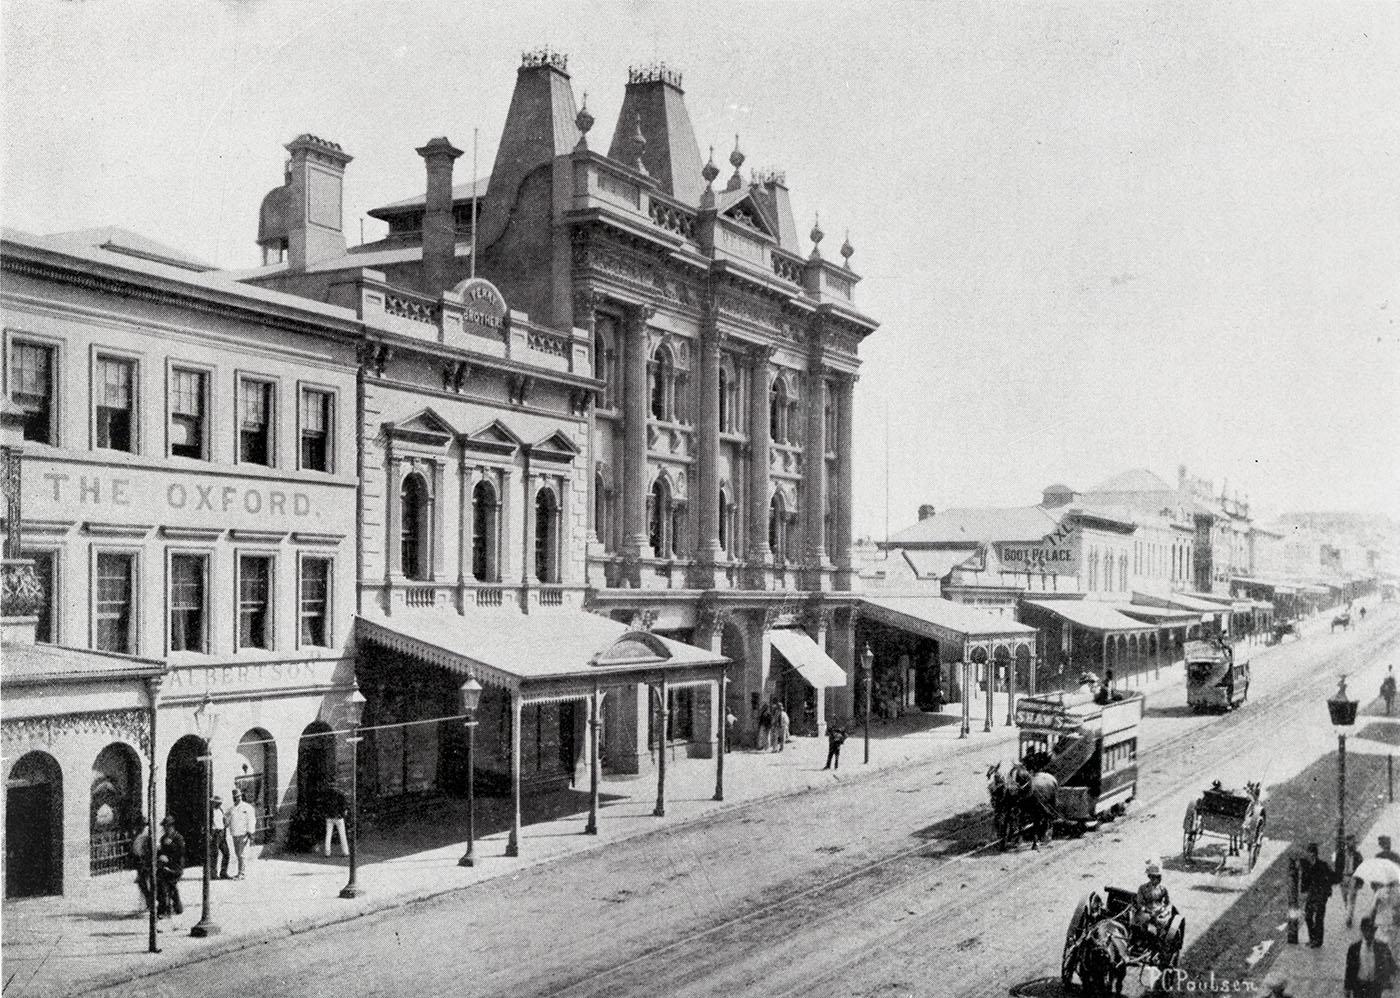 View of Queen street with horse-drawn trams in front